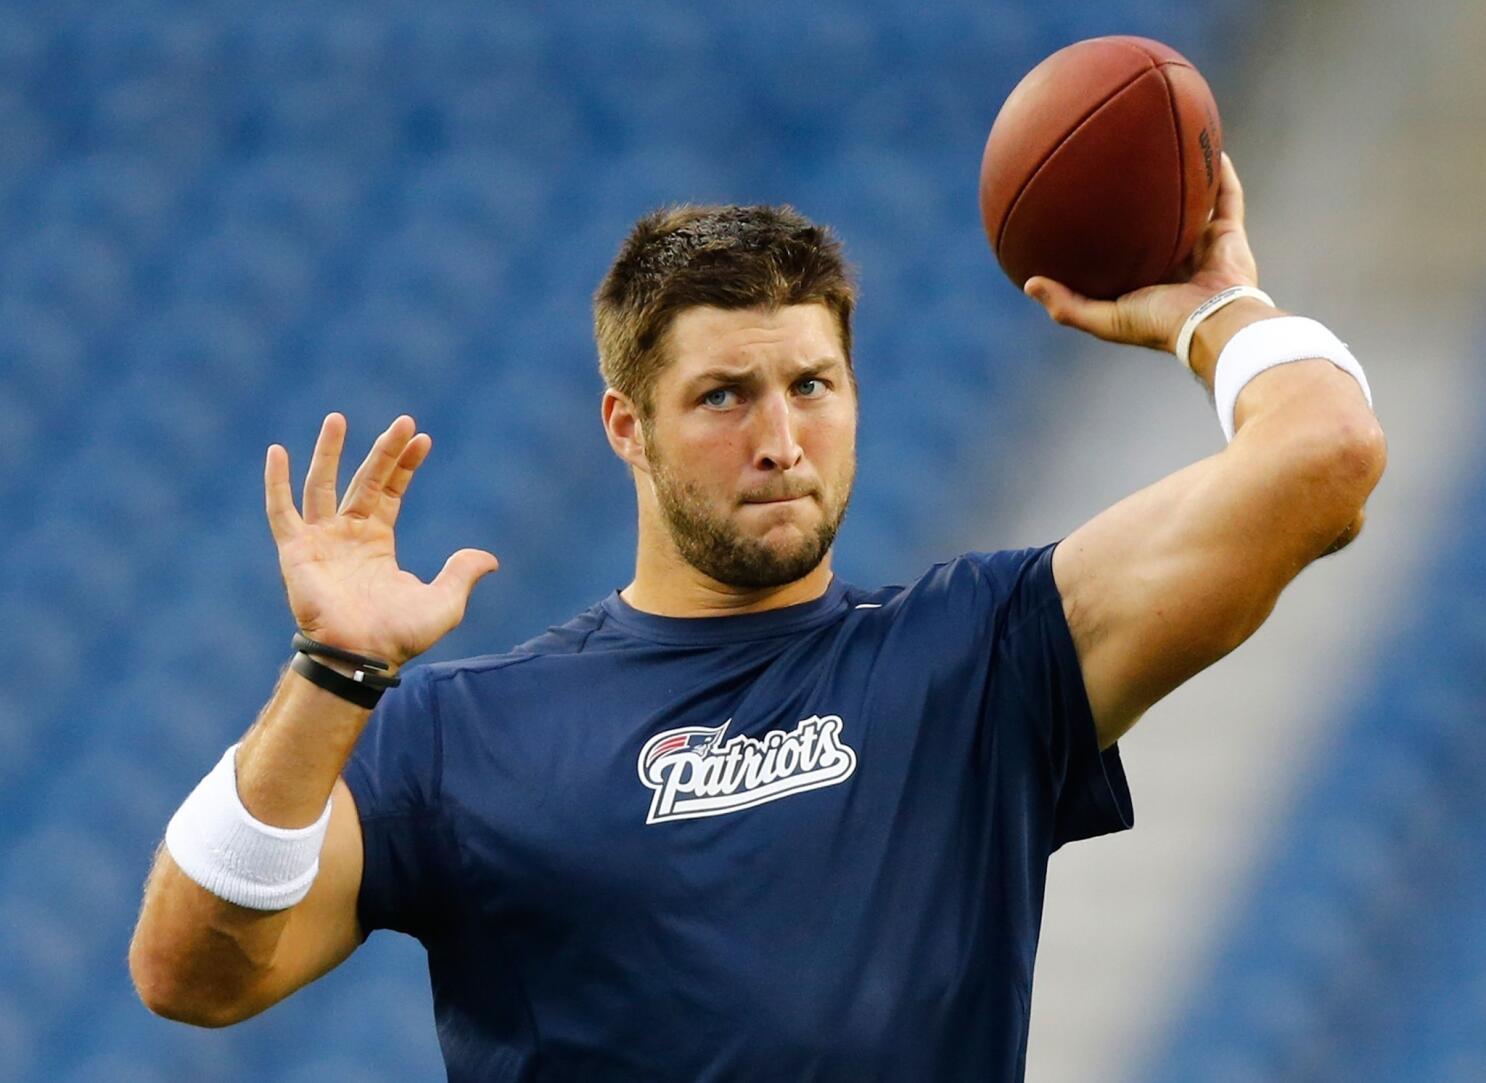 Jaguars fans to hold rally to encourage team to sign Tim Tebow